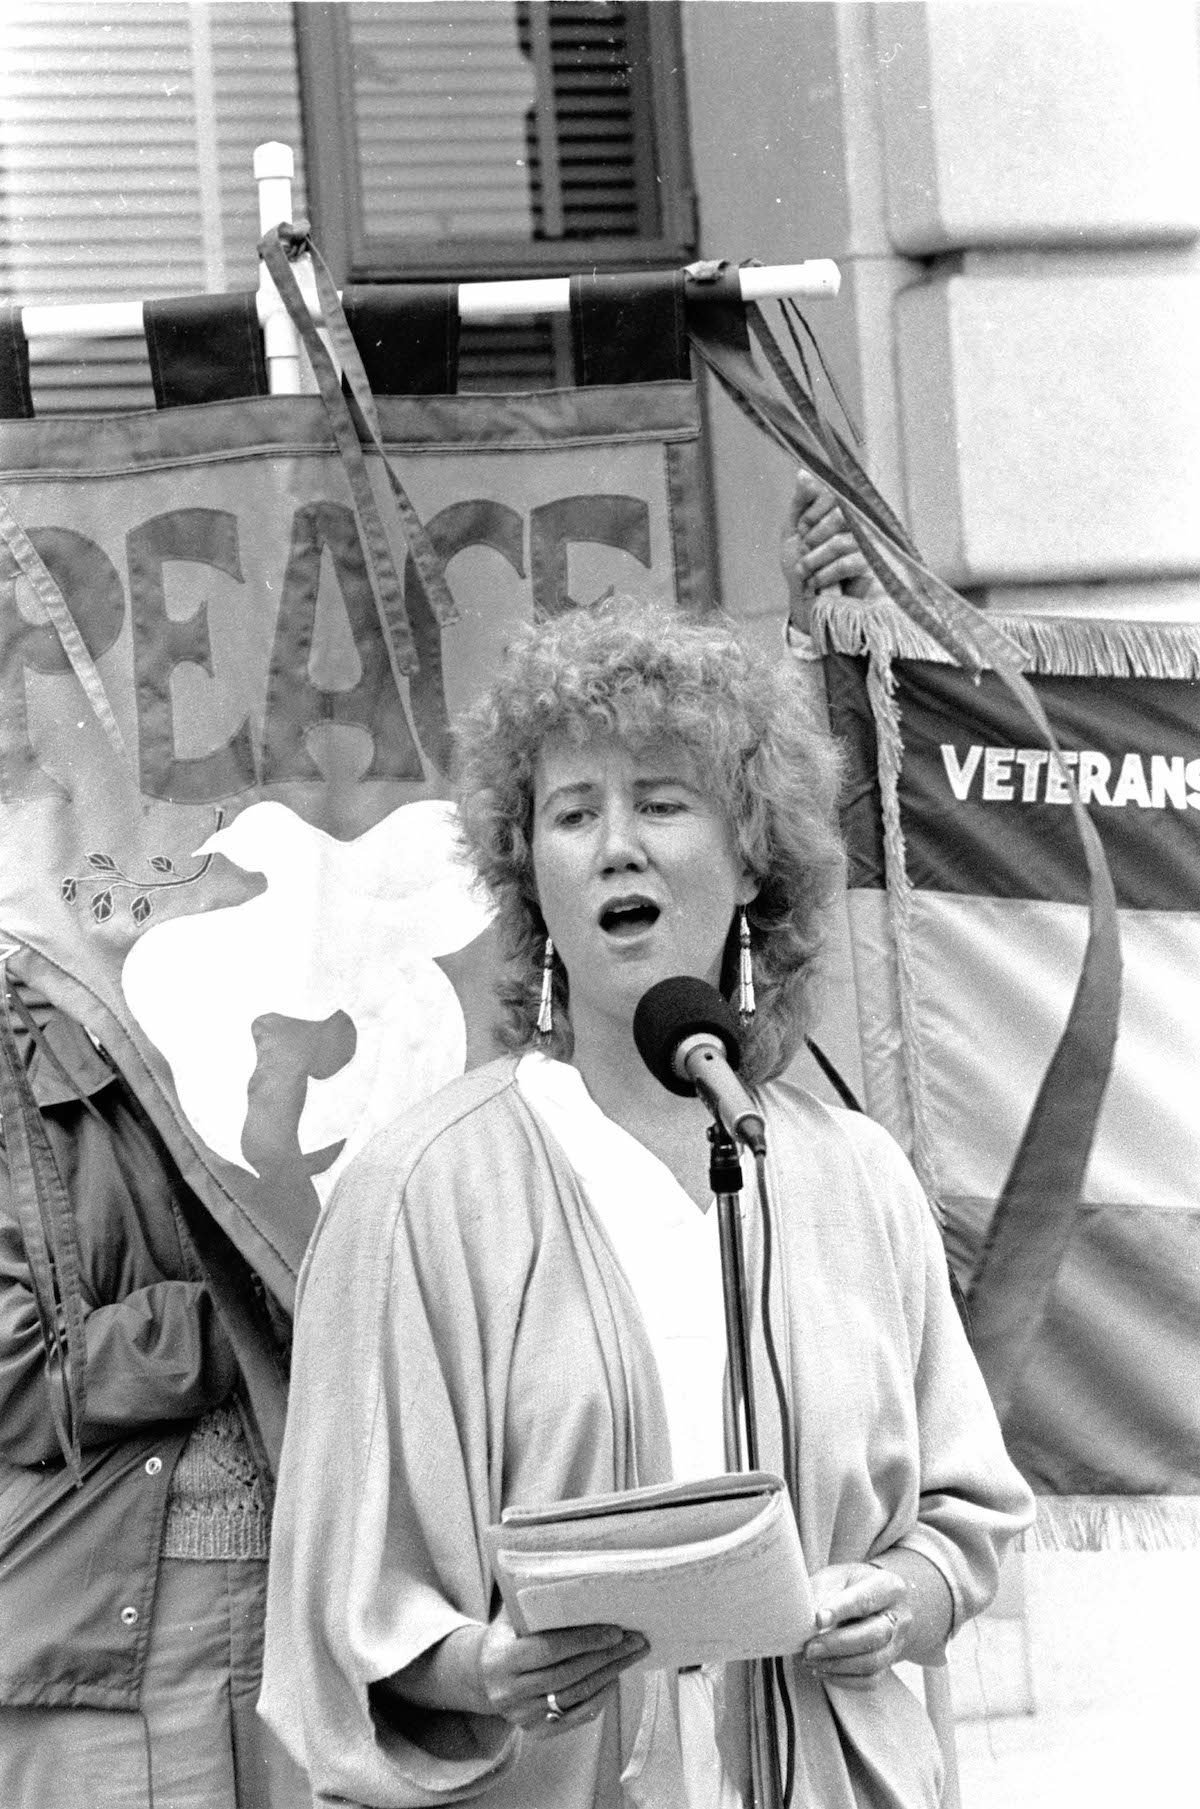 Holly at the Veterans Memorial Anti-War Protest, 1986. Photo Credit: J.A. Rubino. Photo courtesy of Holly Near.